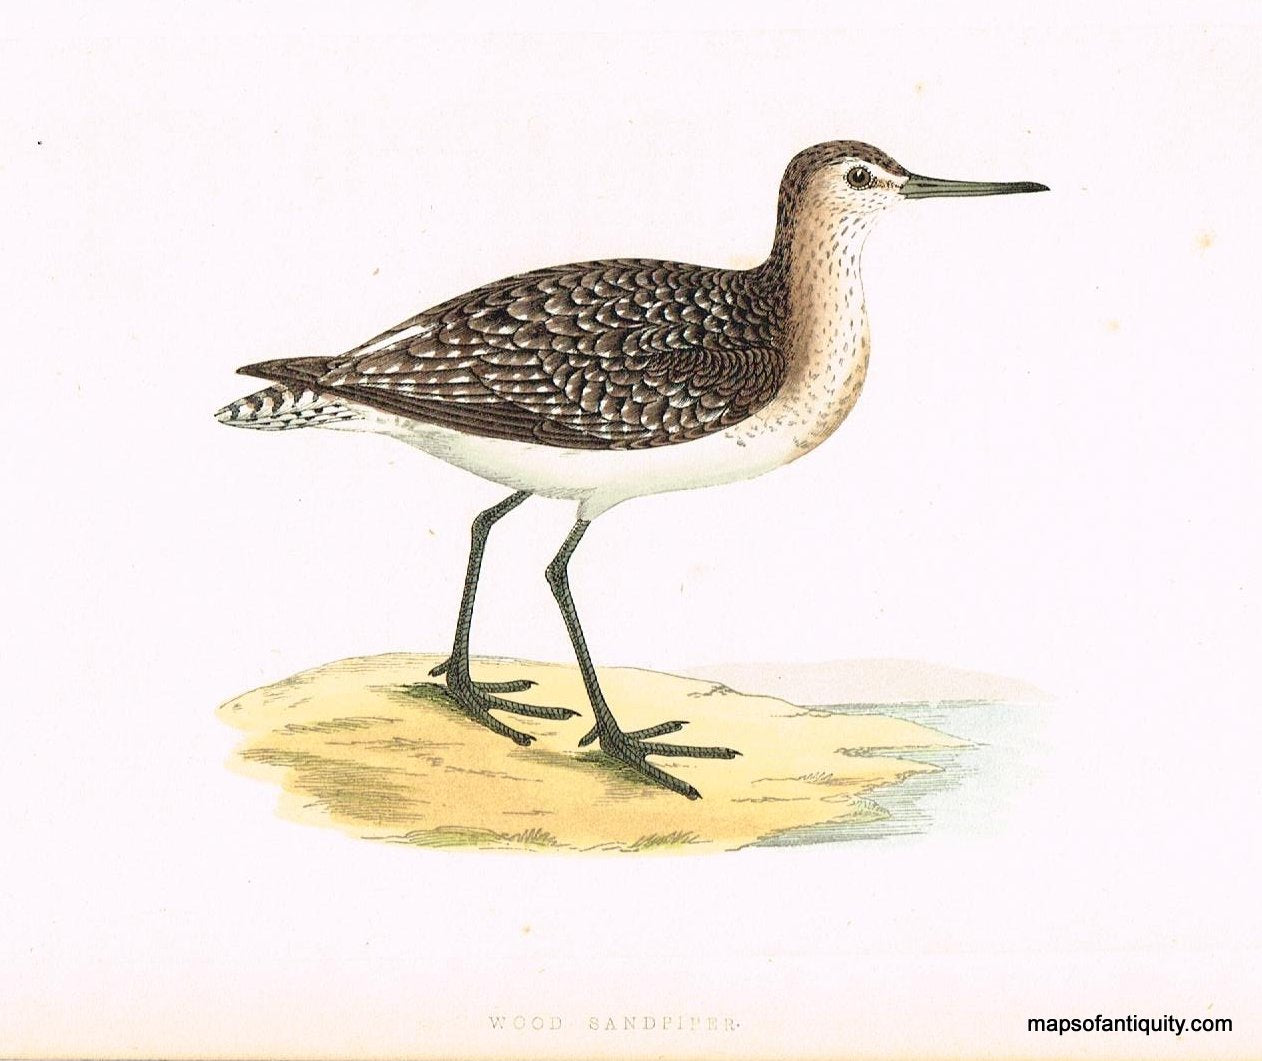 Antique-Hand-Colored-Engraved-Illustration-Wood-Sandpiper-Morris-bird-Natural-History-Birds-1851-Morris-Maps-Of-Antiquity